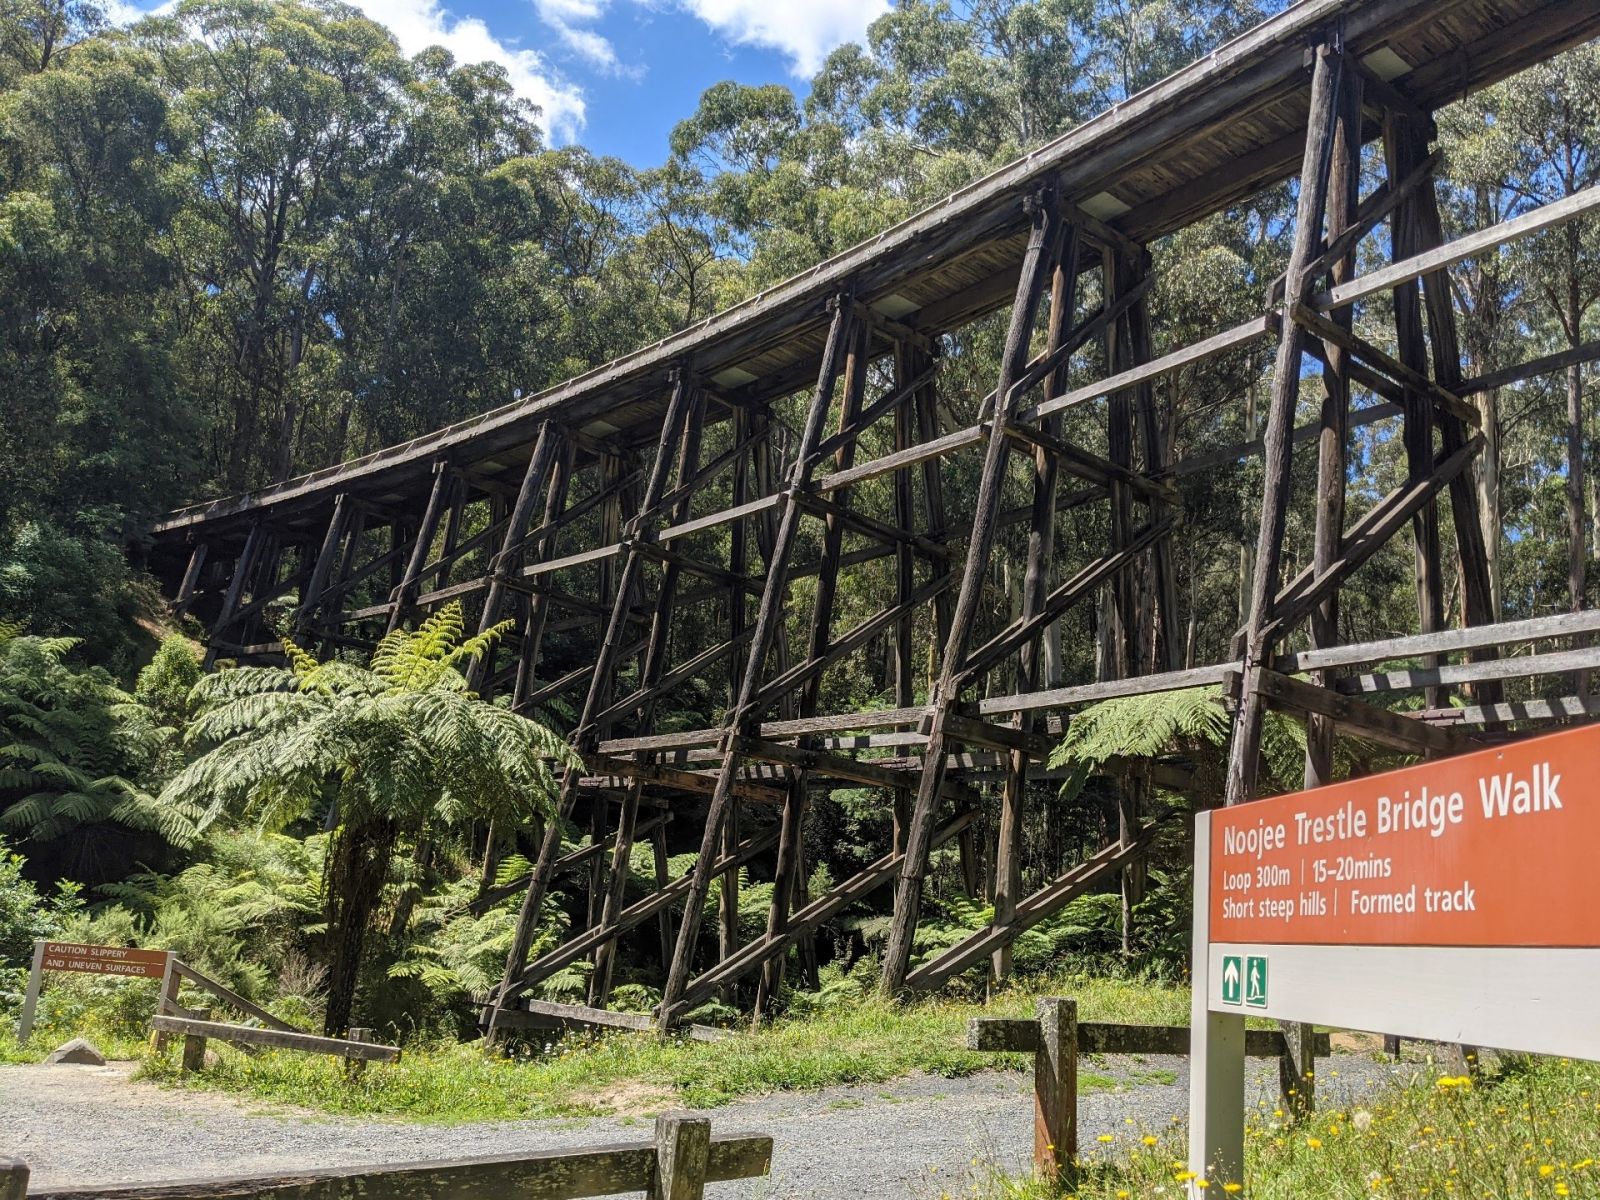 A view of Noojee Trestle Bridge from the ground and a sign with information about the bridge walk